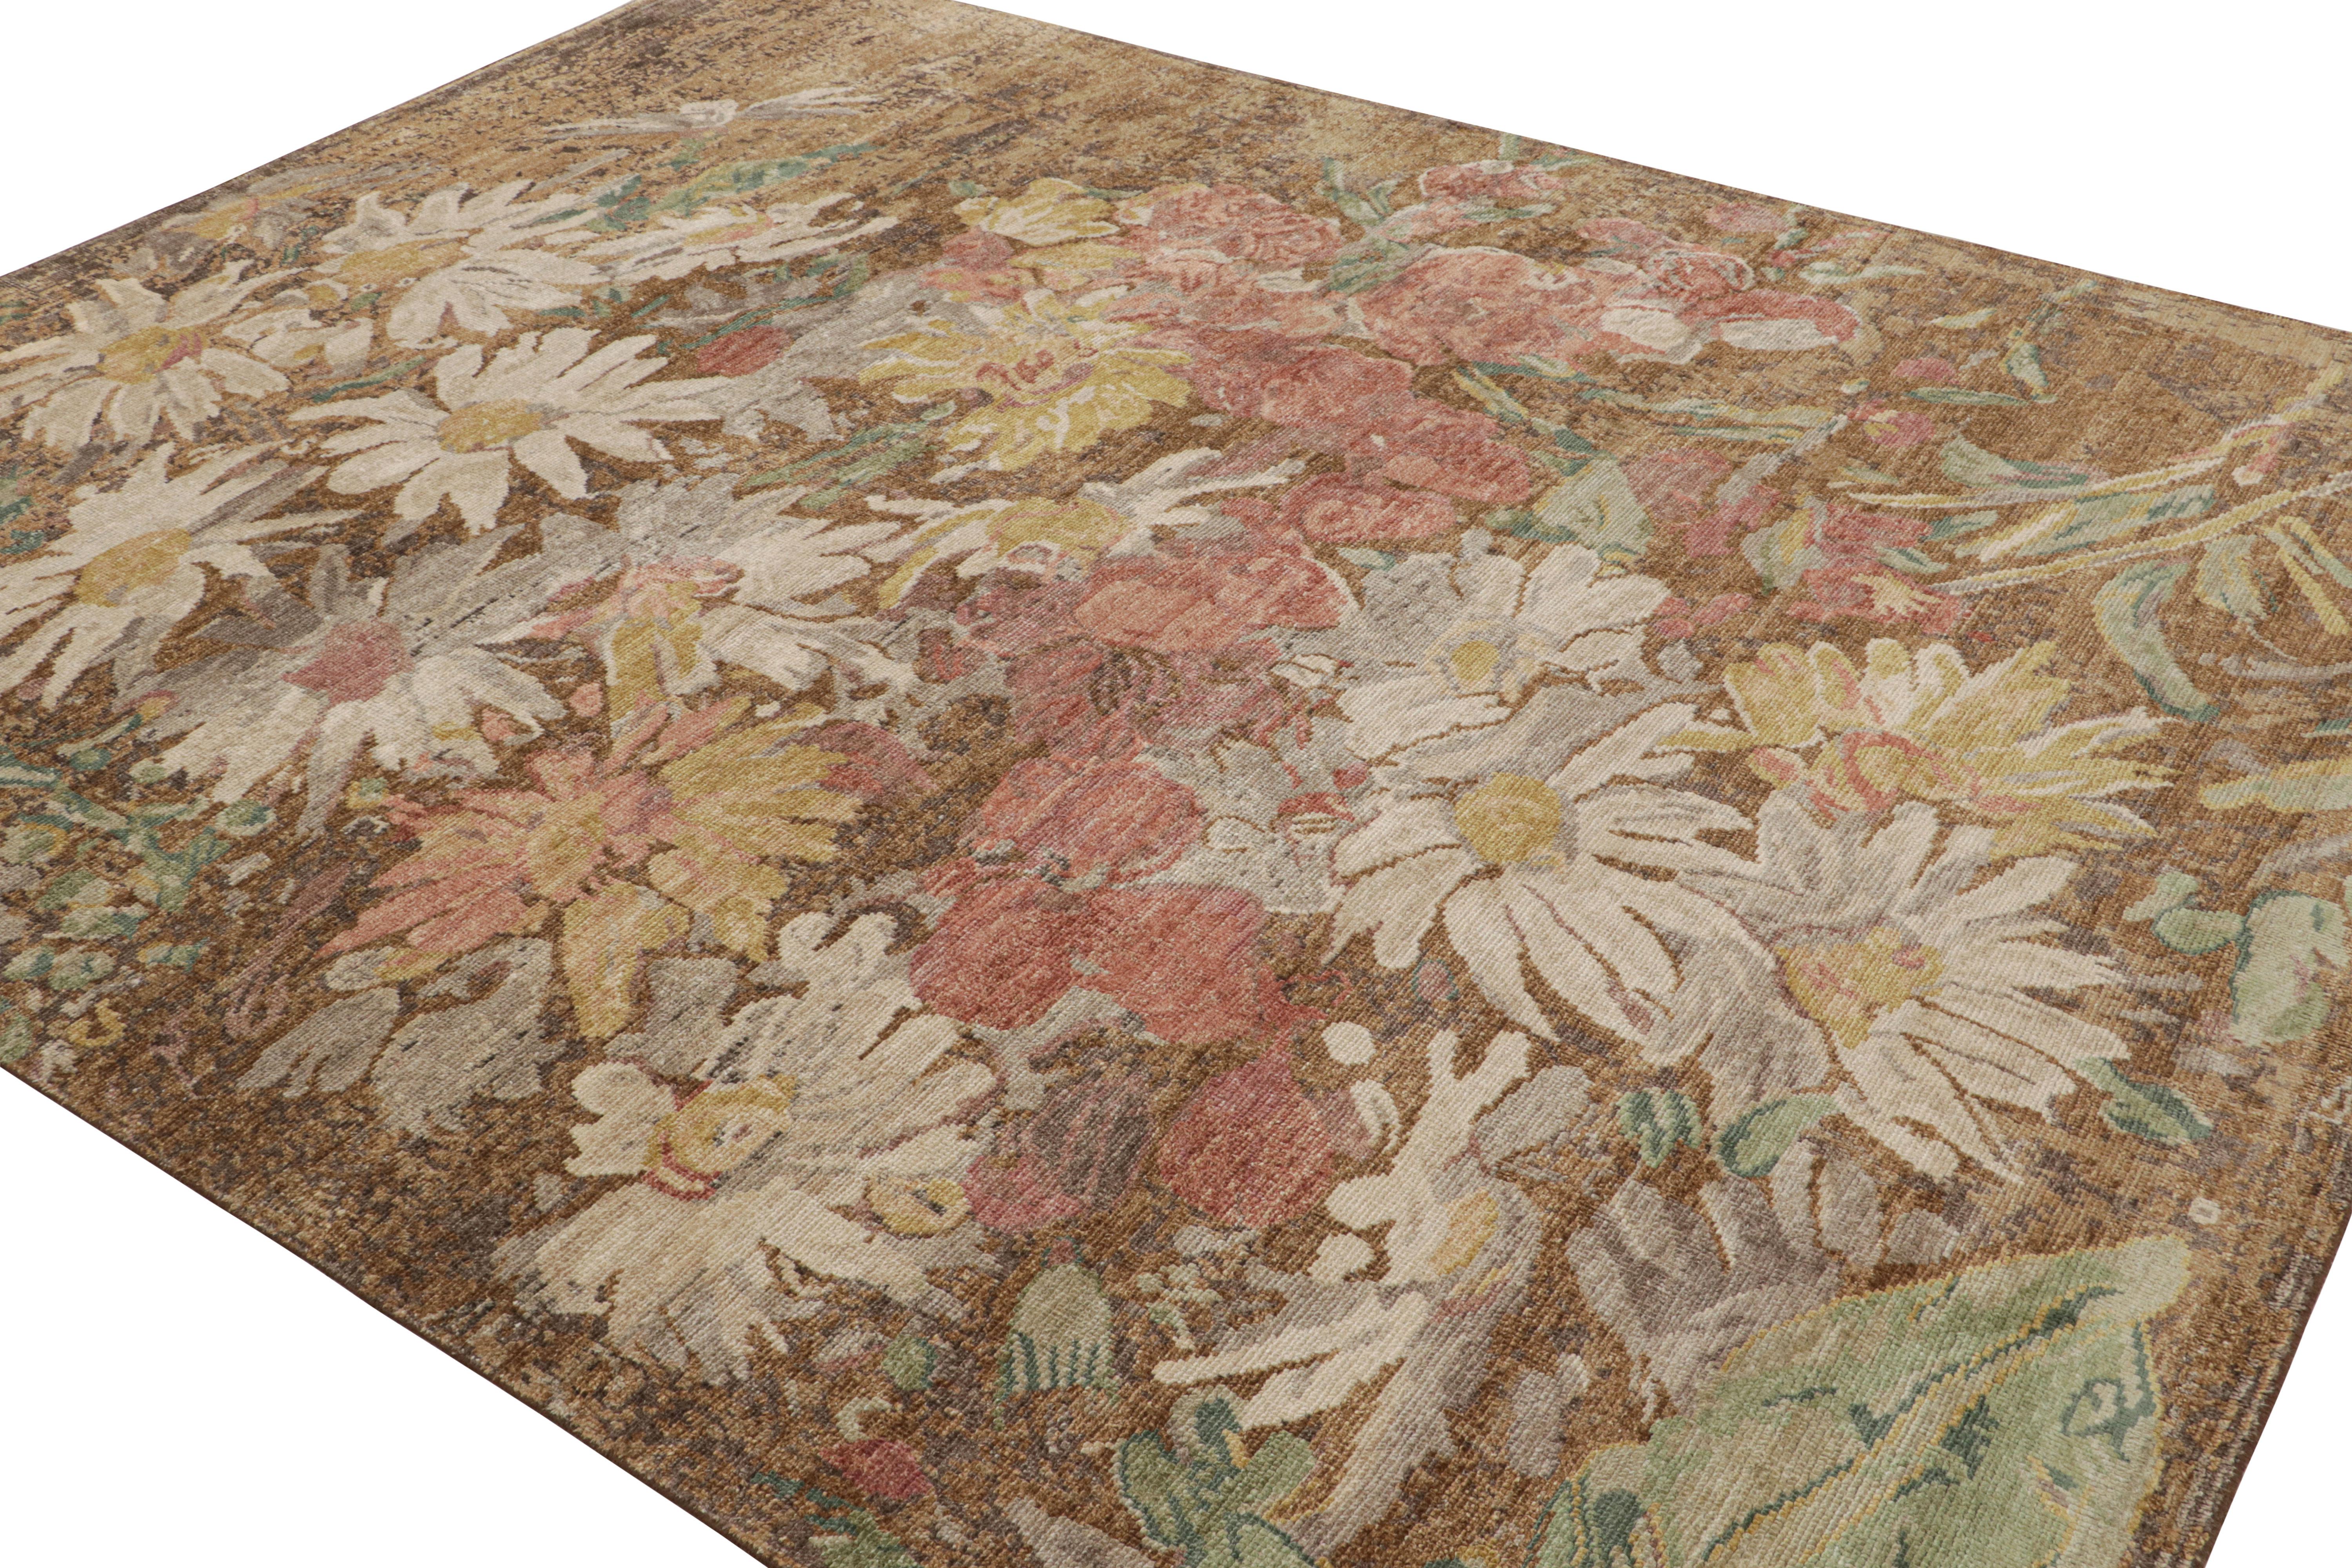 Inspired by botanical designs, this 8x10 distressed style modern rug is from Rug & Kilim’s Homage collection. Hand-knotted in wool.

On the Design:

In this contemporary botanical design, rich brown underscores floral patterns in pastels and jewel